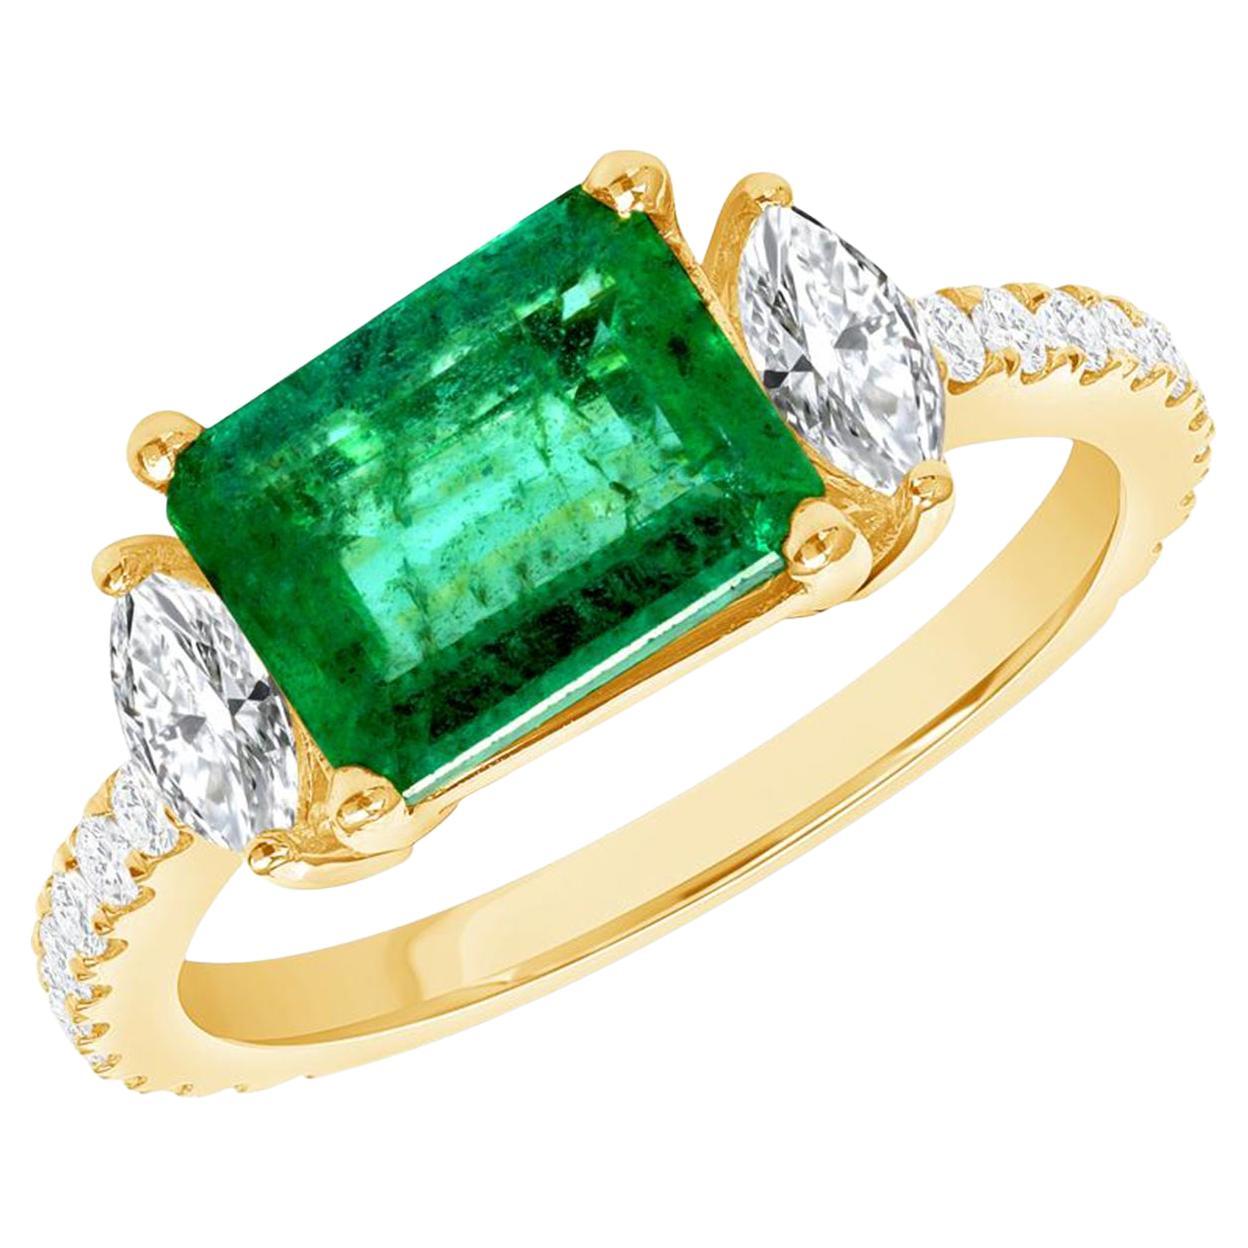 1.61 CT Zambian Emerald & 0.67 CT Diamonds in 14K Yellow Gold Engagement Ring For Sale